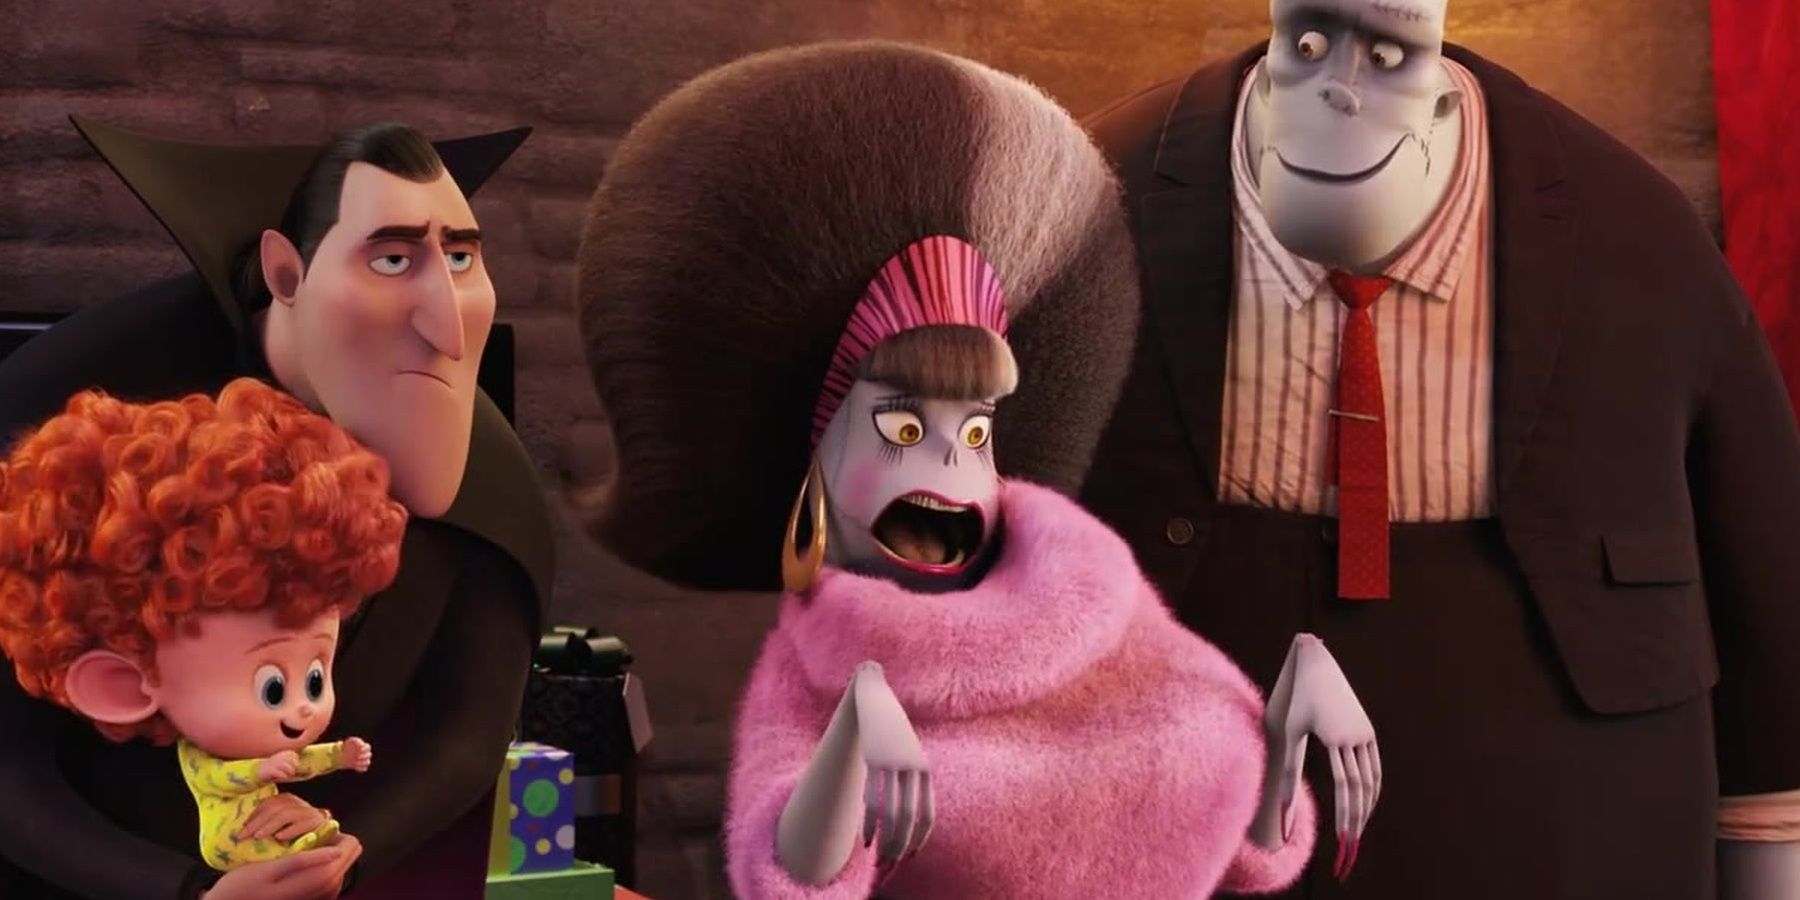 Eunice, Frank, Dracula, and Dennis stand together in Hotel Transylvania